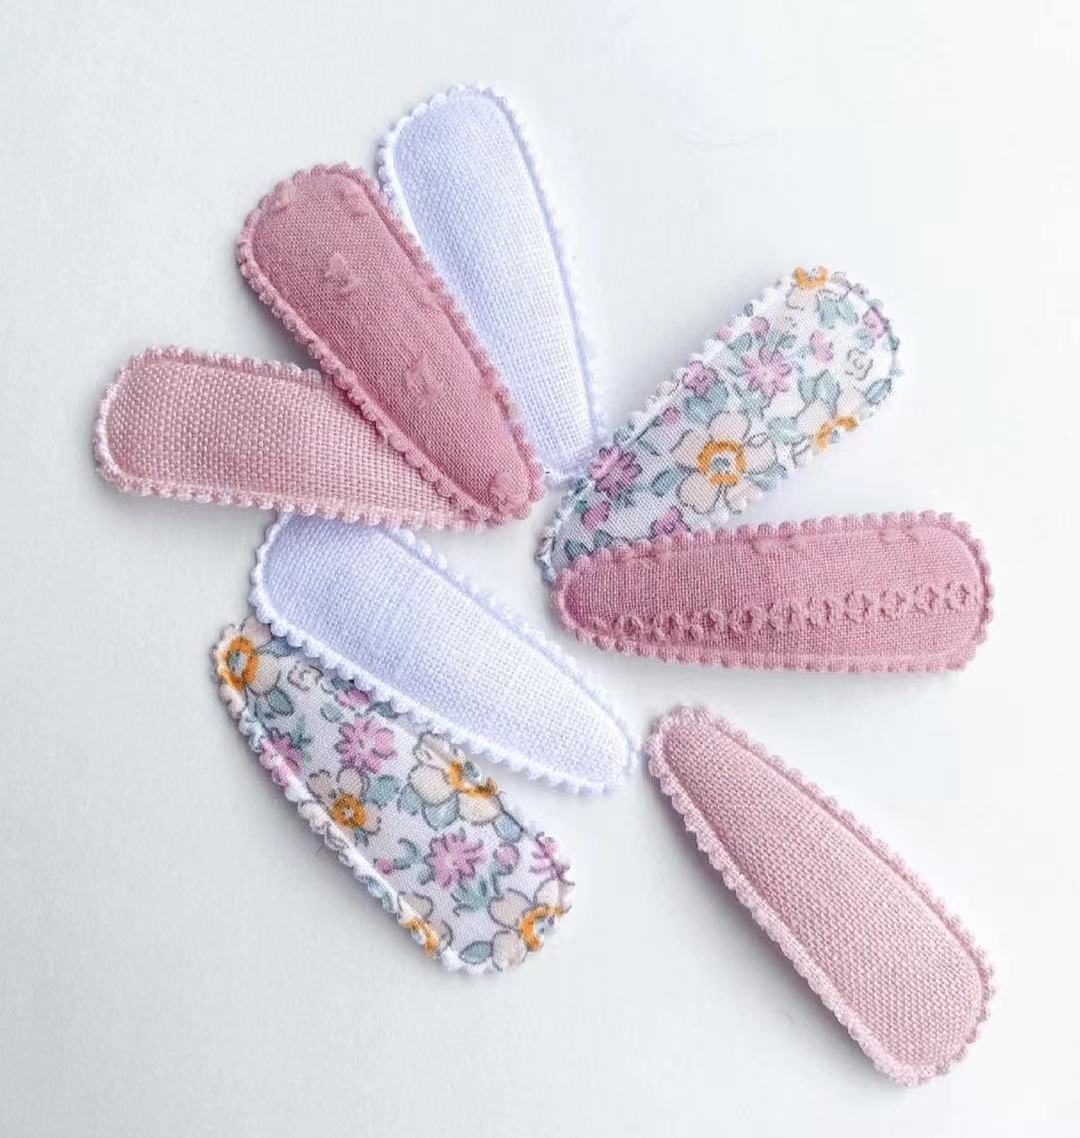 FABRIC SNAP CLIPS - PINK & AUDREY FLORAL